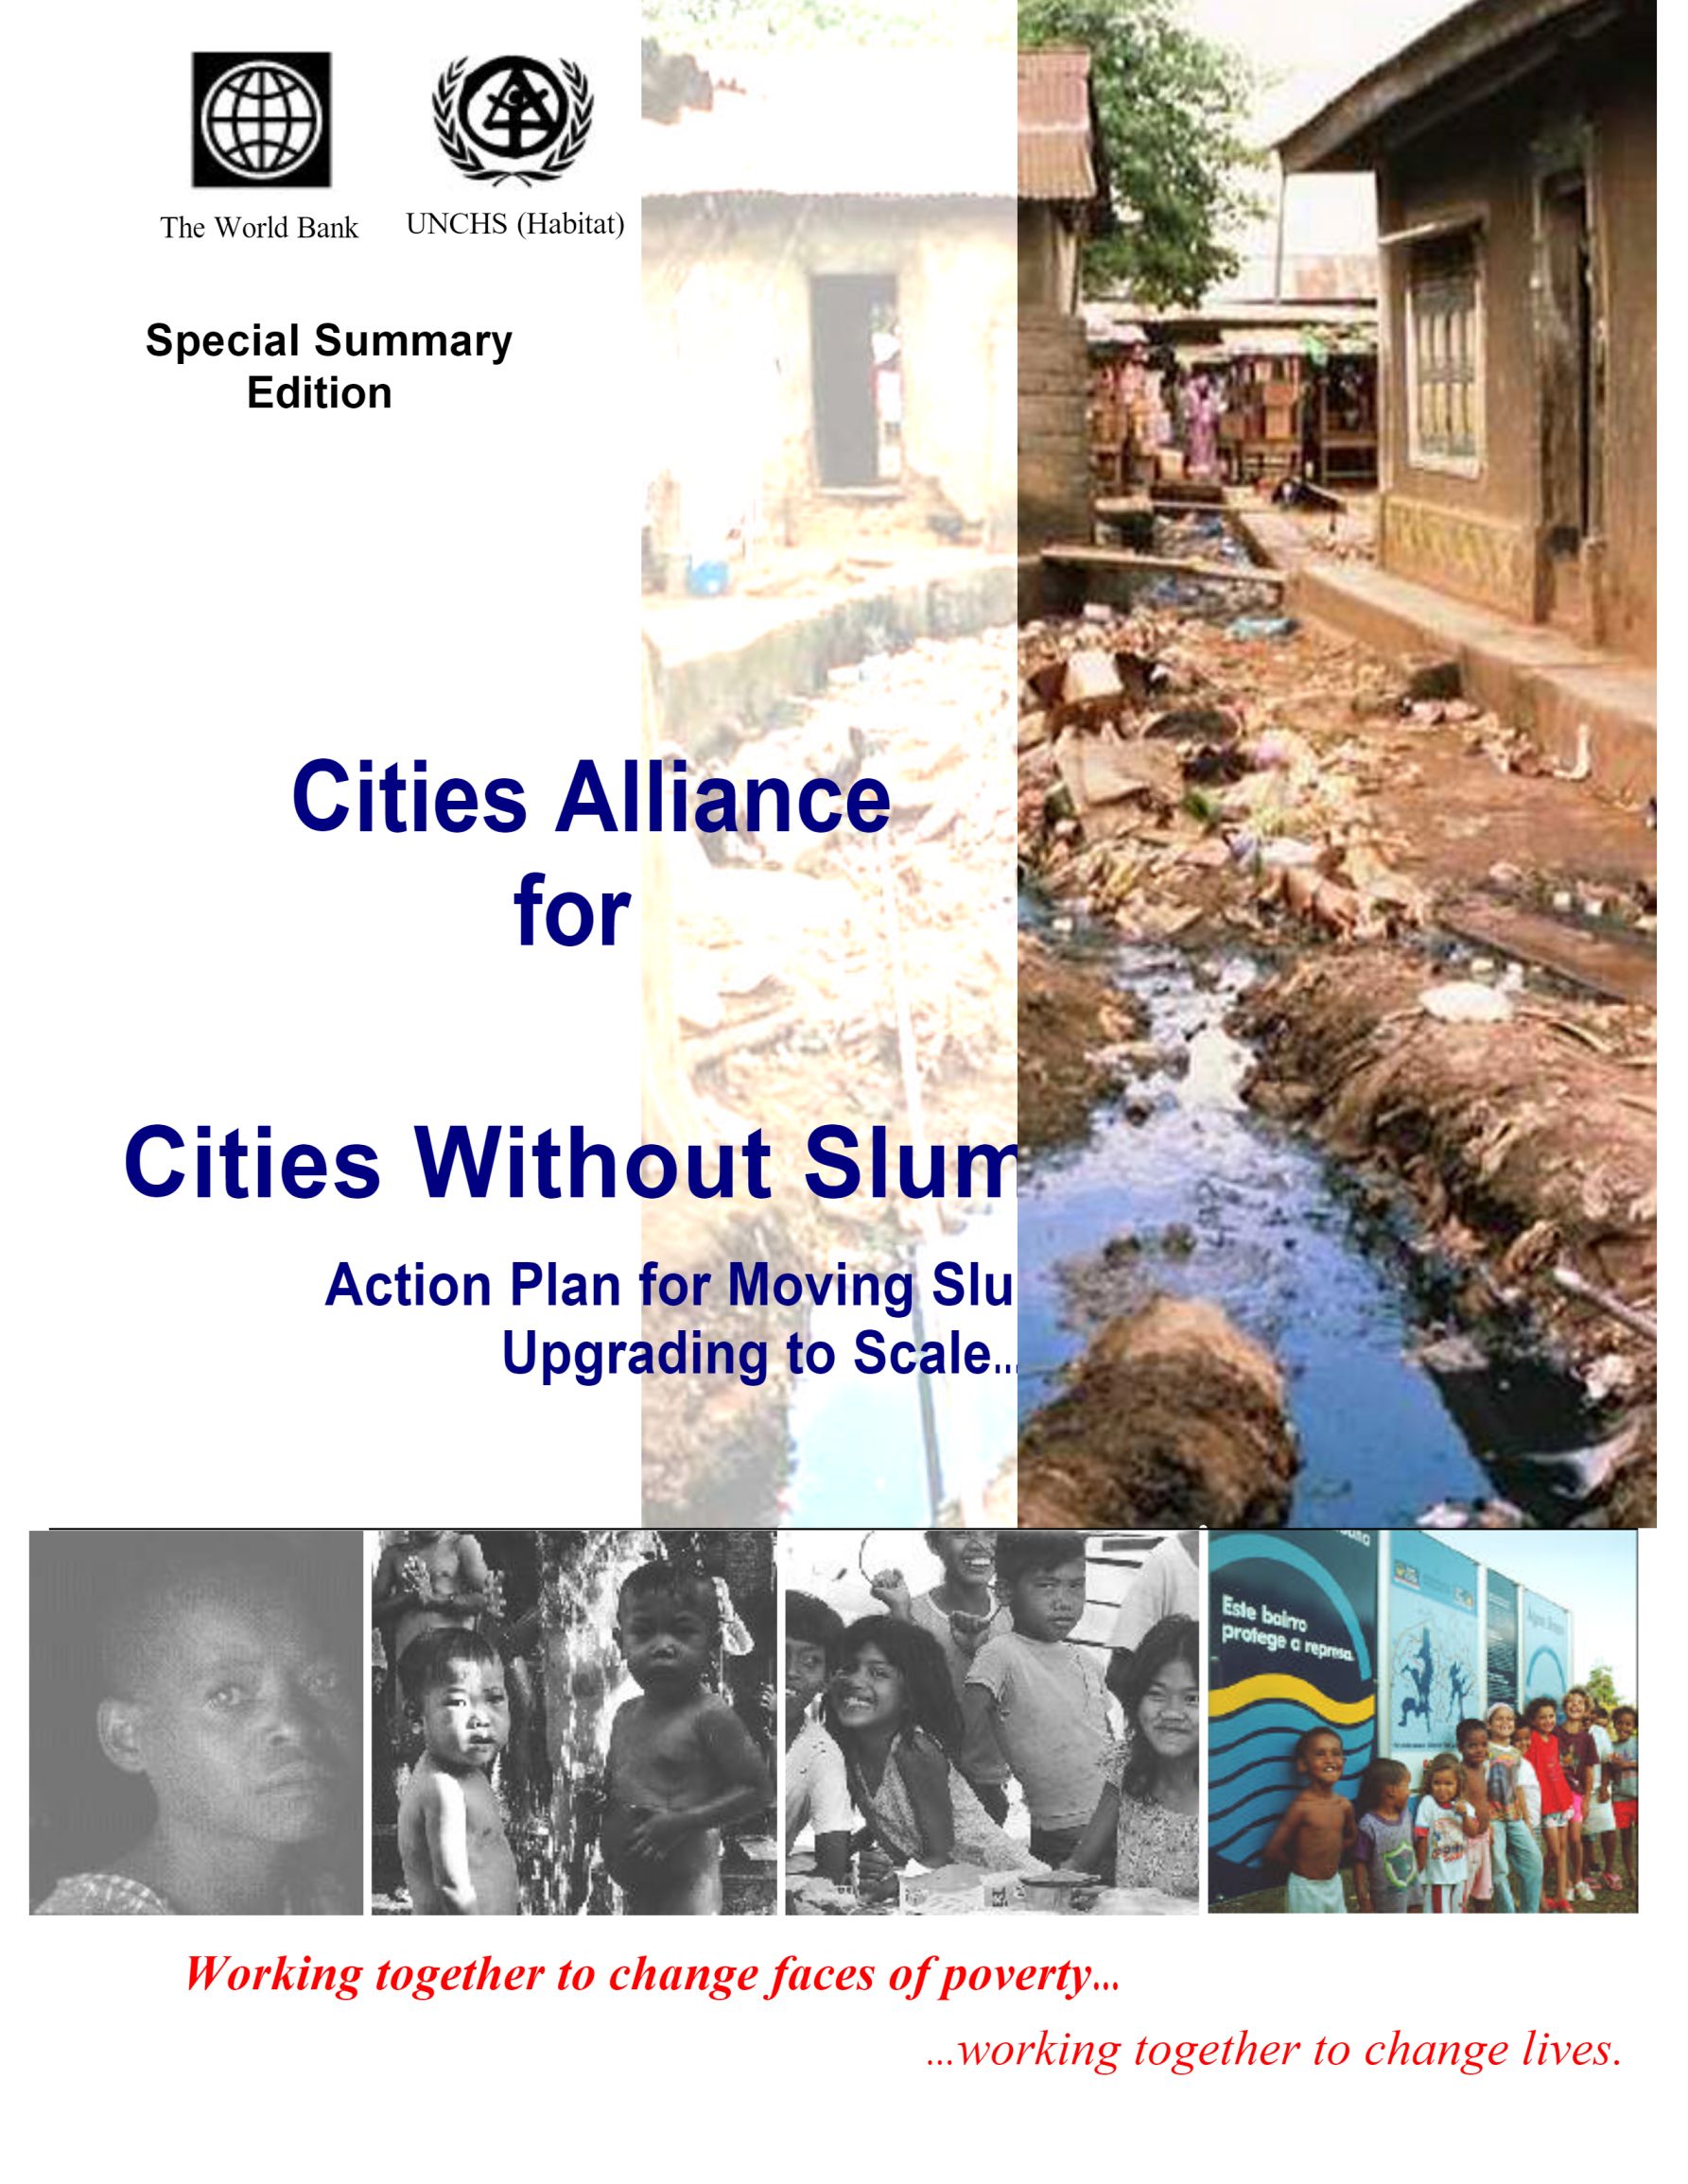 Cities Alliance, Cities Without Slums